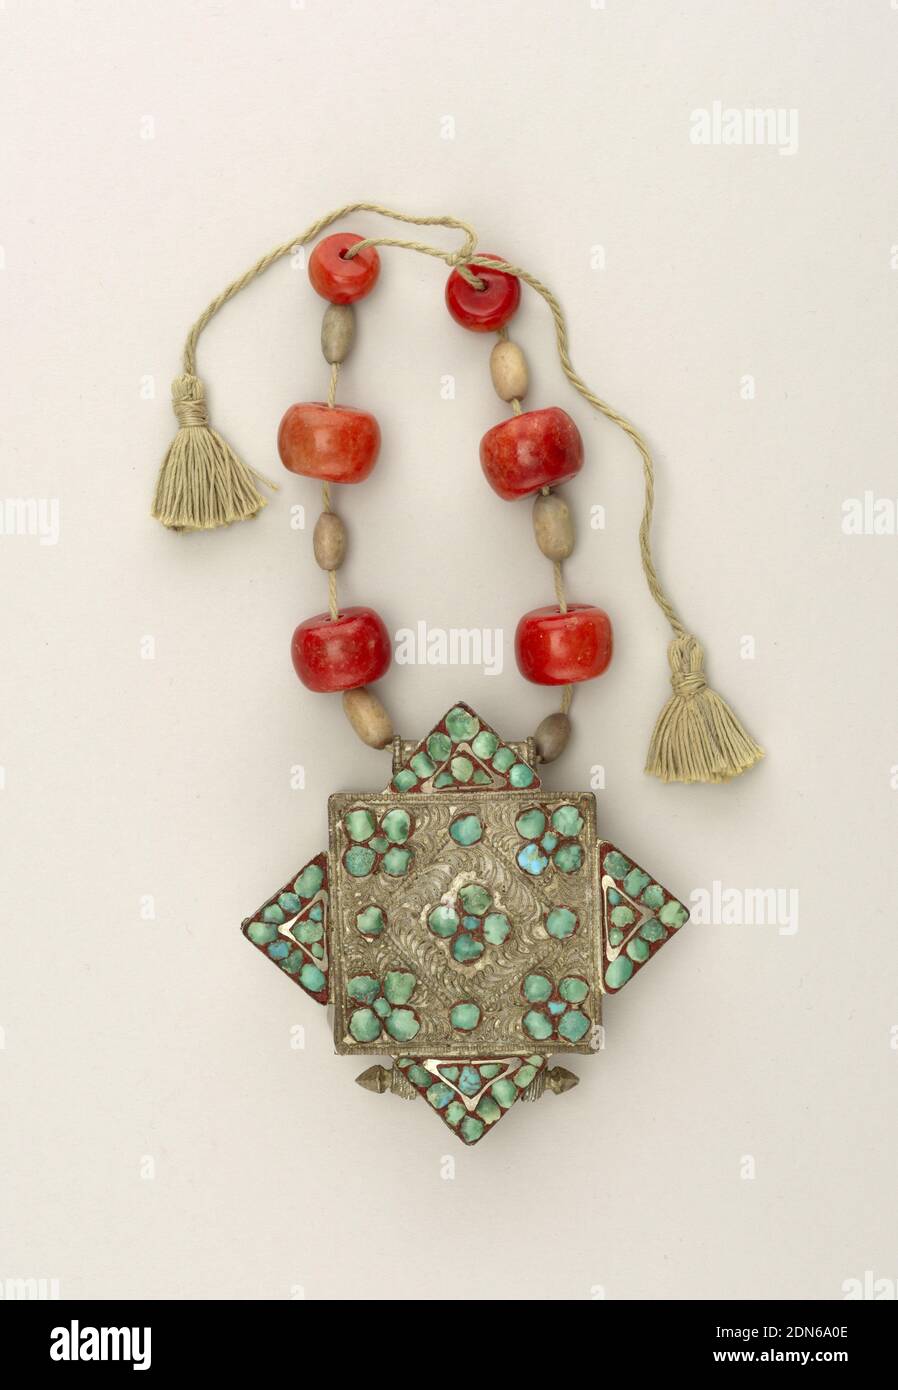 Necklace with amulet, Silver alloy, turquoise, carnelian beads, fiber, Amulet: metal, probably silver alloy. Box 5.5 cm (2 1/8 in.) square, with cover having filigree and turquoise ornamentation including four triangular pieces at base, applied at each side of cover making overall dimension of cover an approximate square 6.5 cm. Hollow cylinders permit a cord with twelve beads (cord supplemented by neck ribbon) to suspend amulet from neck. Purpose of other cylinder, ornamented with twisted wire and conical ends, probably purely decorative., 19th century, jewelry, Decorative Arts, Necklace Stock Photo